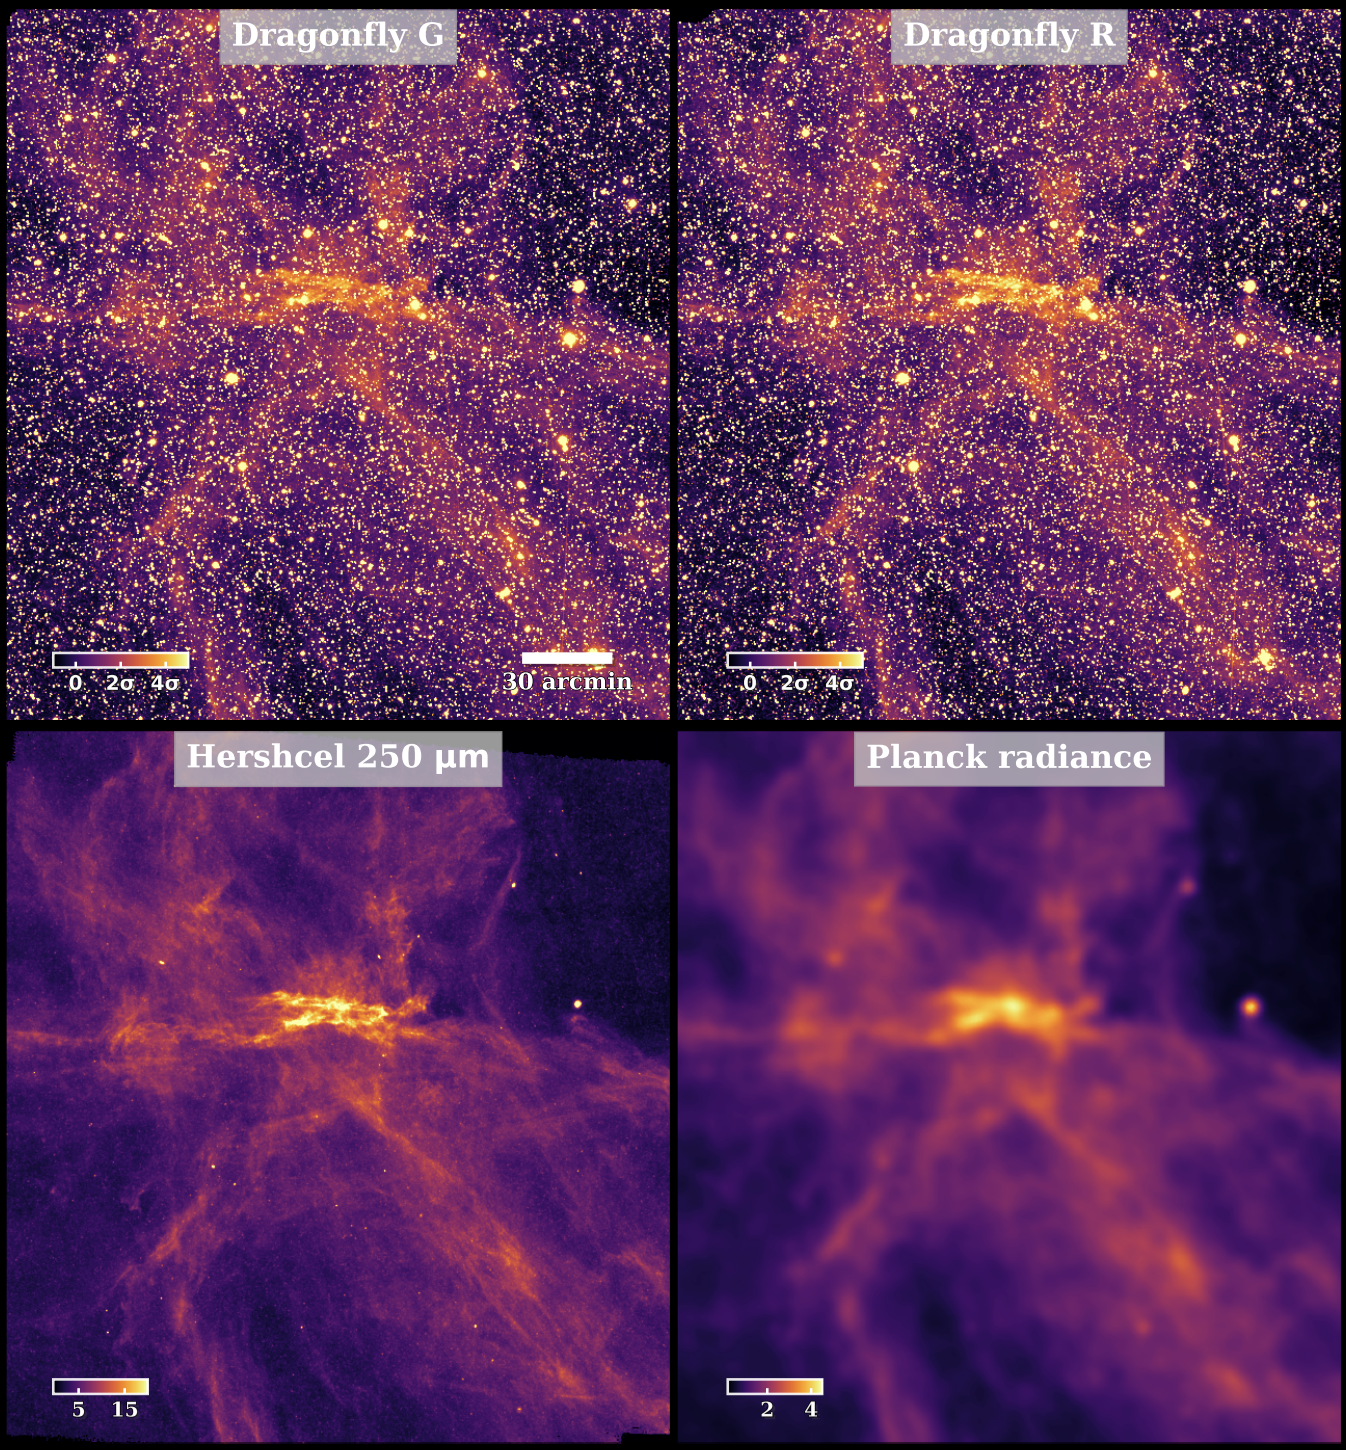 The close match of Dragonfly images on Galactic cirrus with Planck and Herschel maps